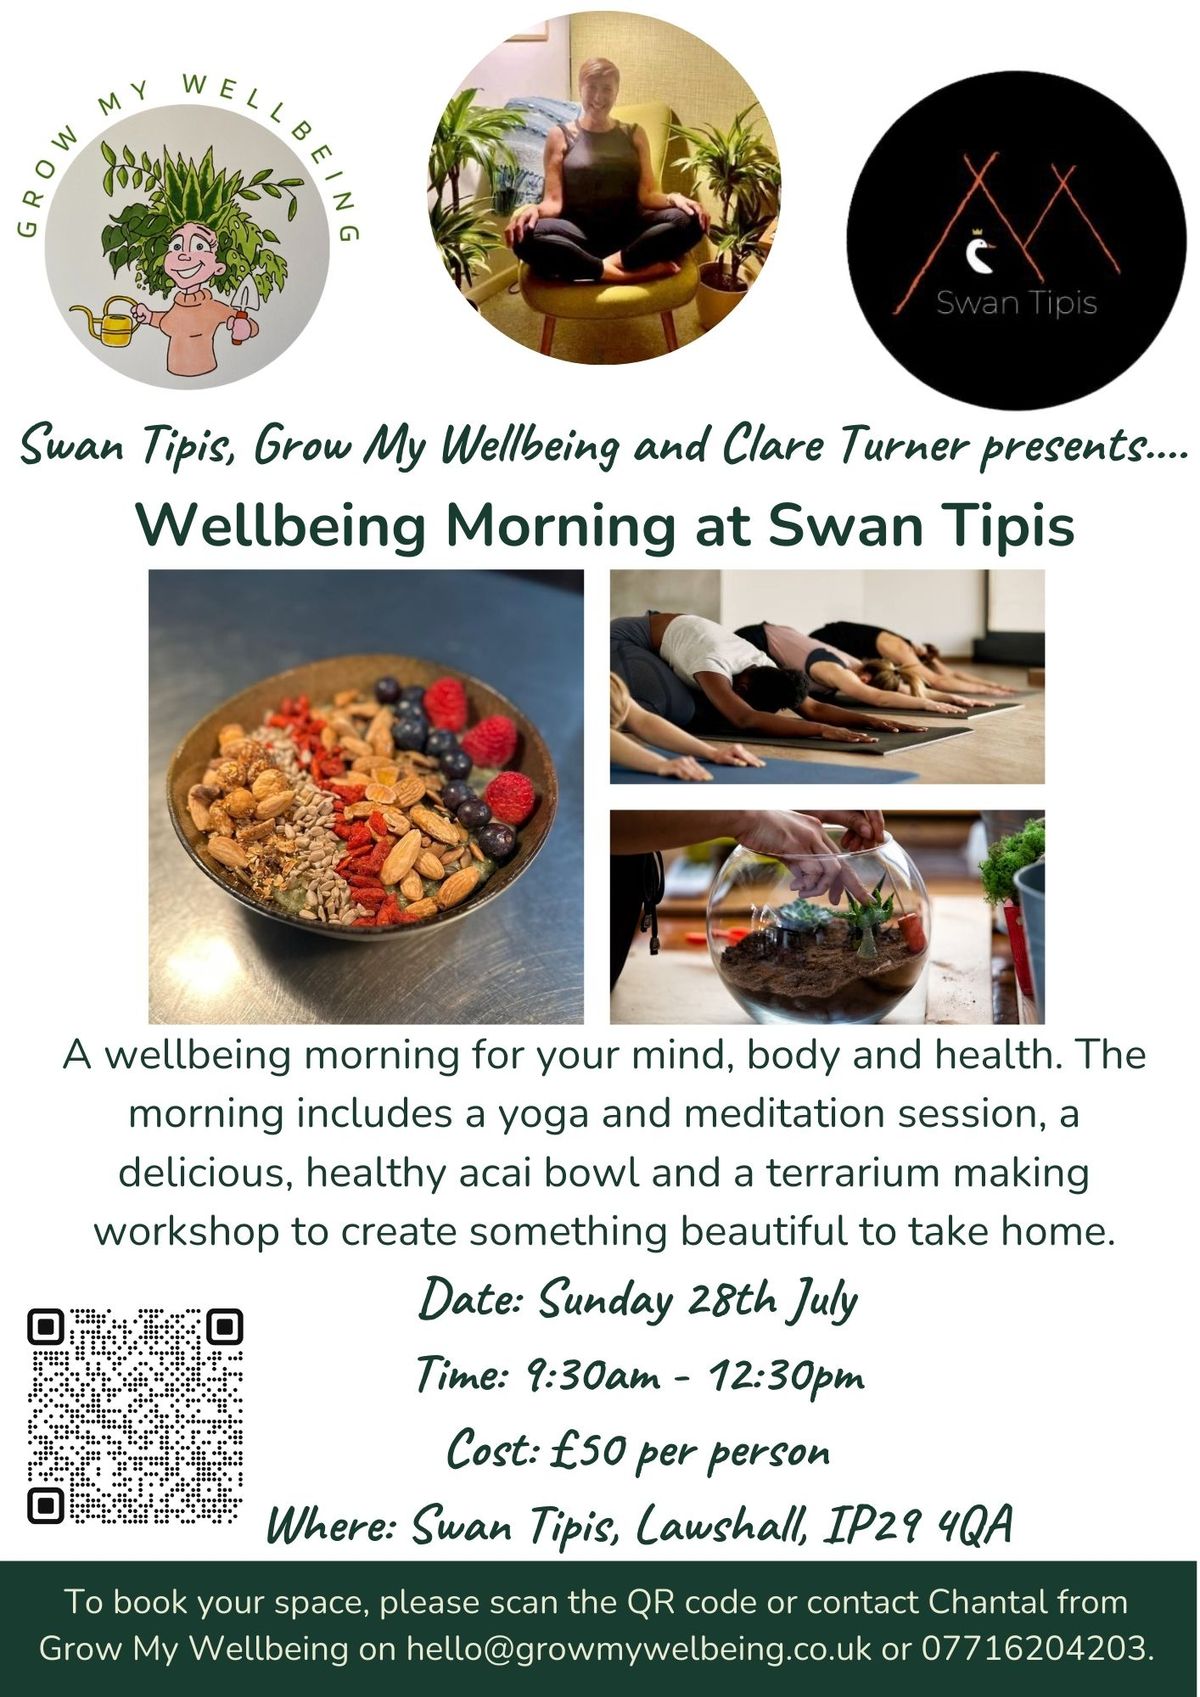 Wellbeing Morning at Swan Tipis